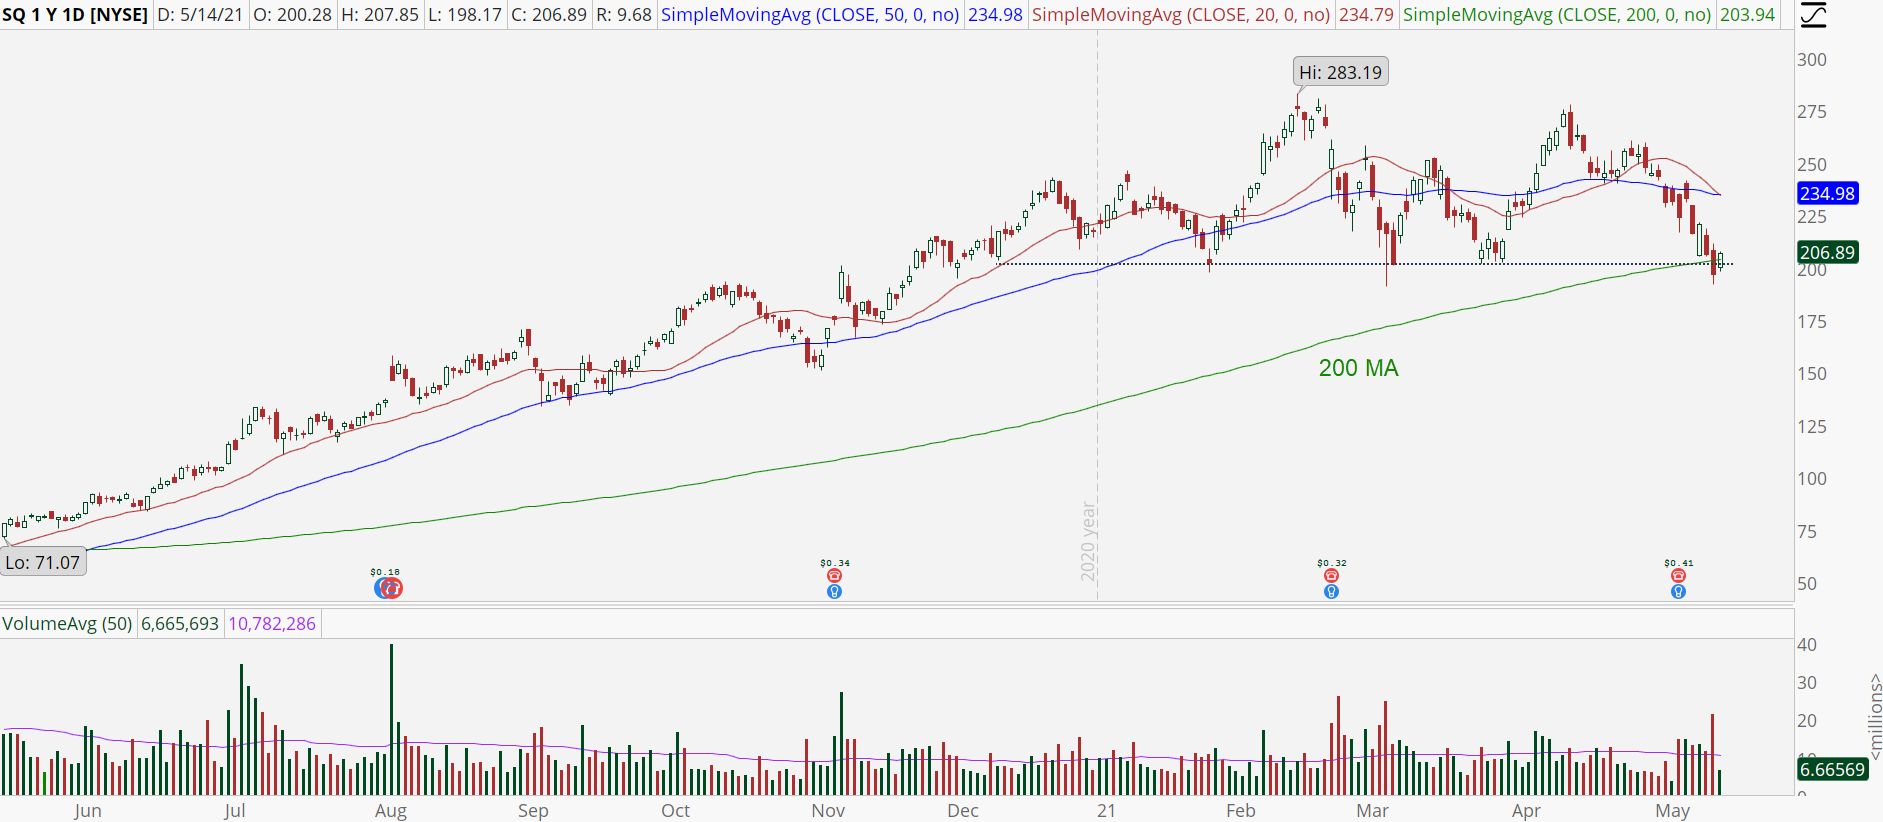 Square (SQ) stock with potential support break